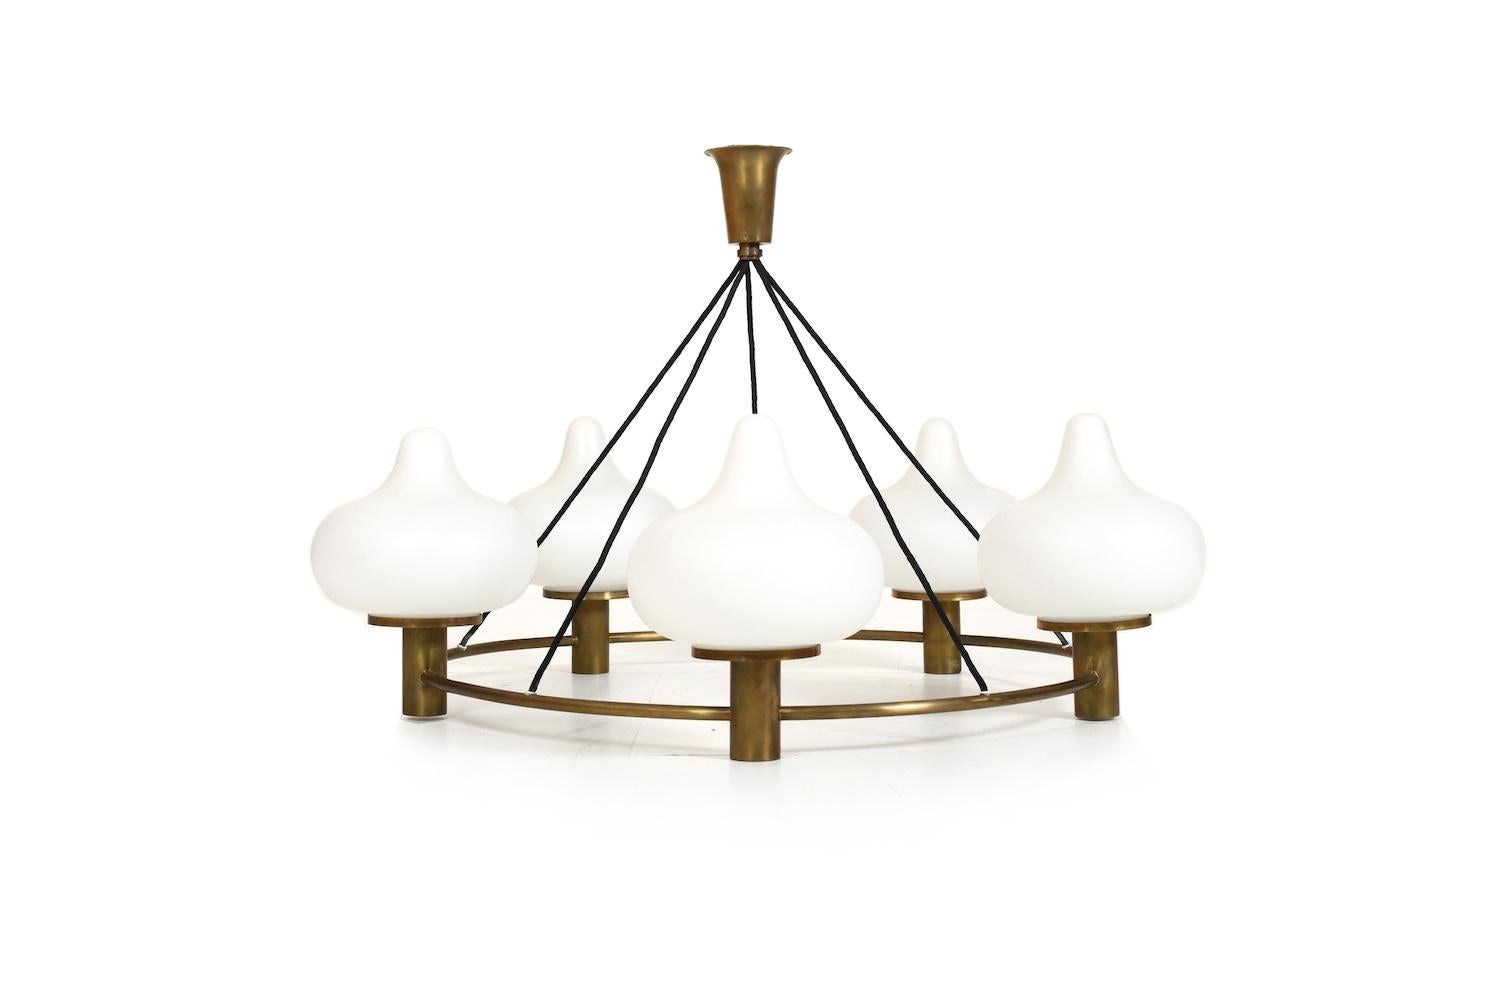 Chandelier / crown by Mogens Hammer & Henning Moldenhawer for Louis Poulsen Denmark 1950s. Made in brass and opaline glass. All in original condition. Brass not polished, we preefer the original condition.

We have also the matching wall lamps